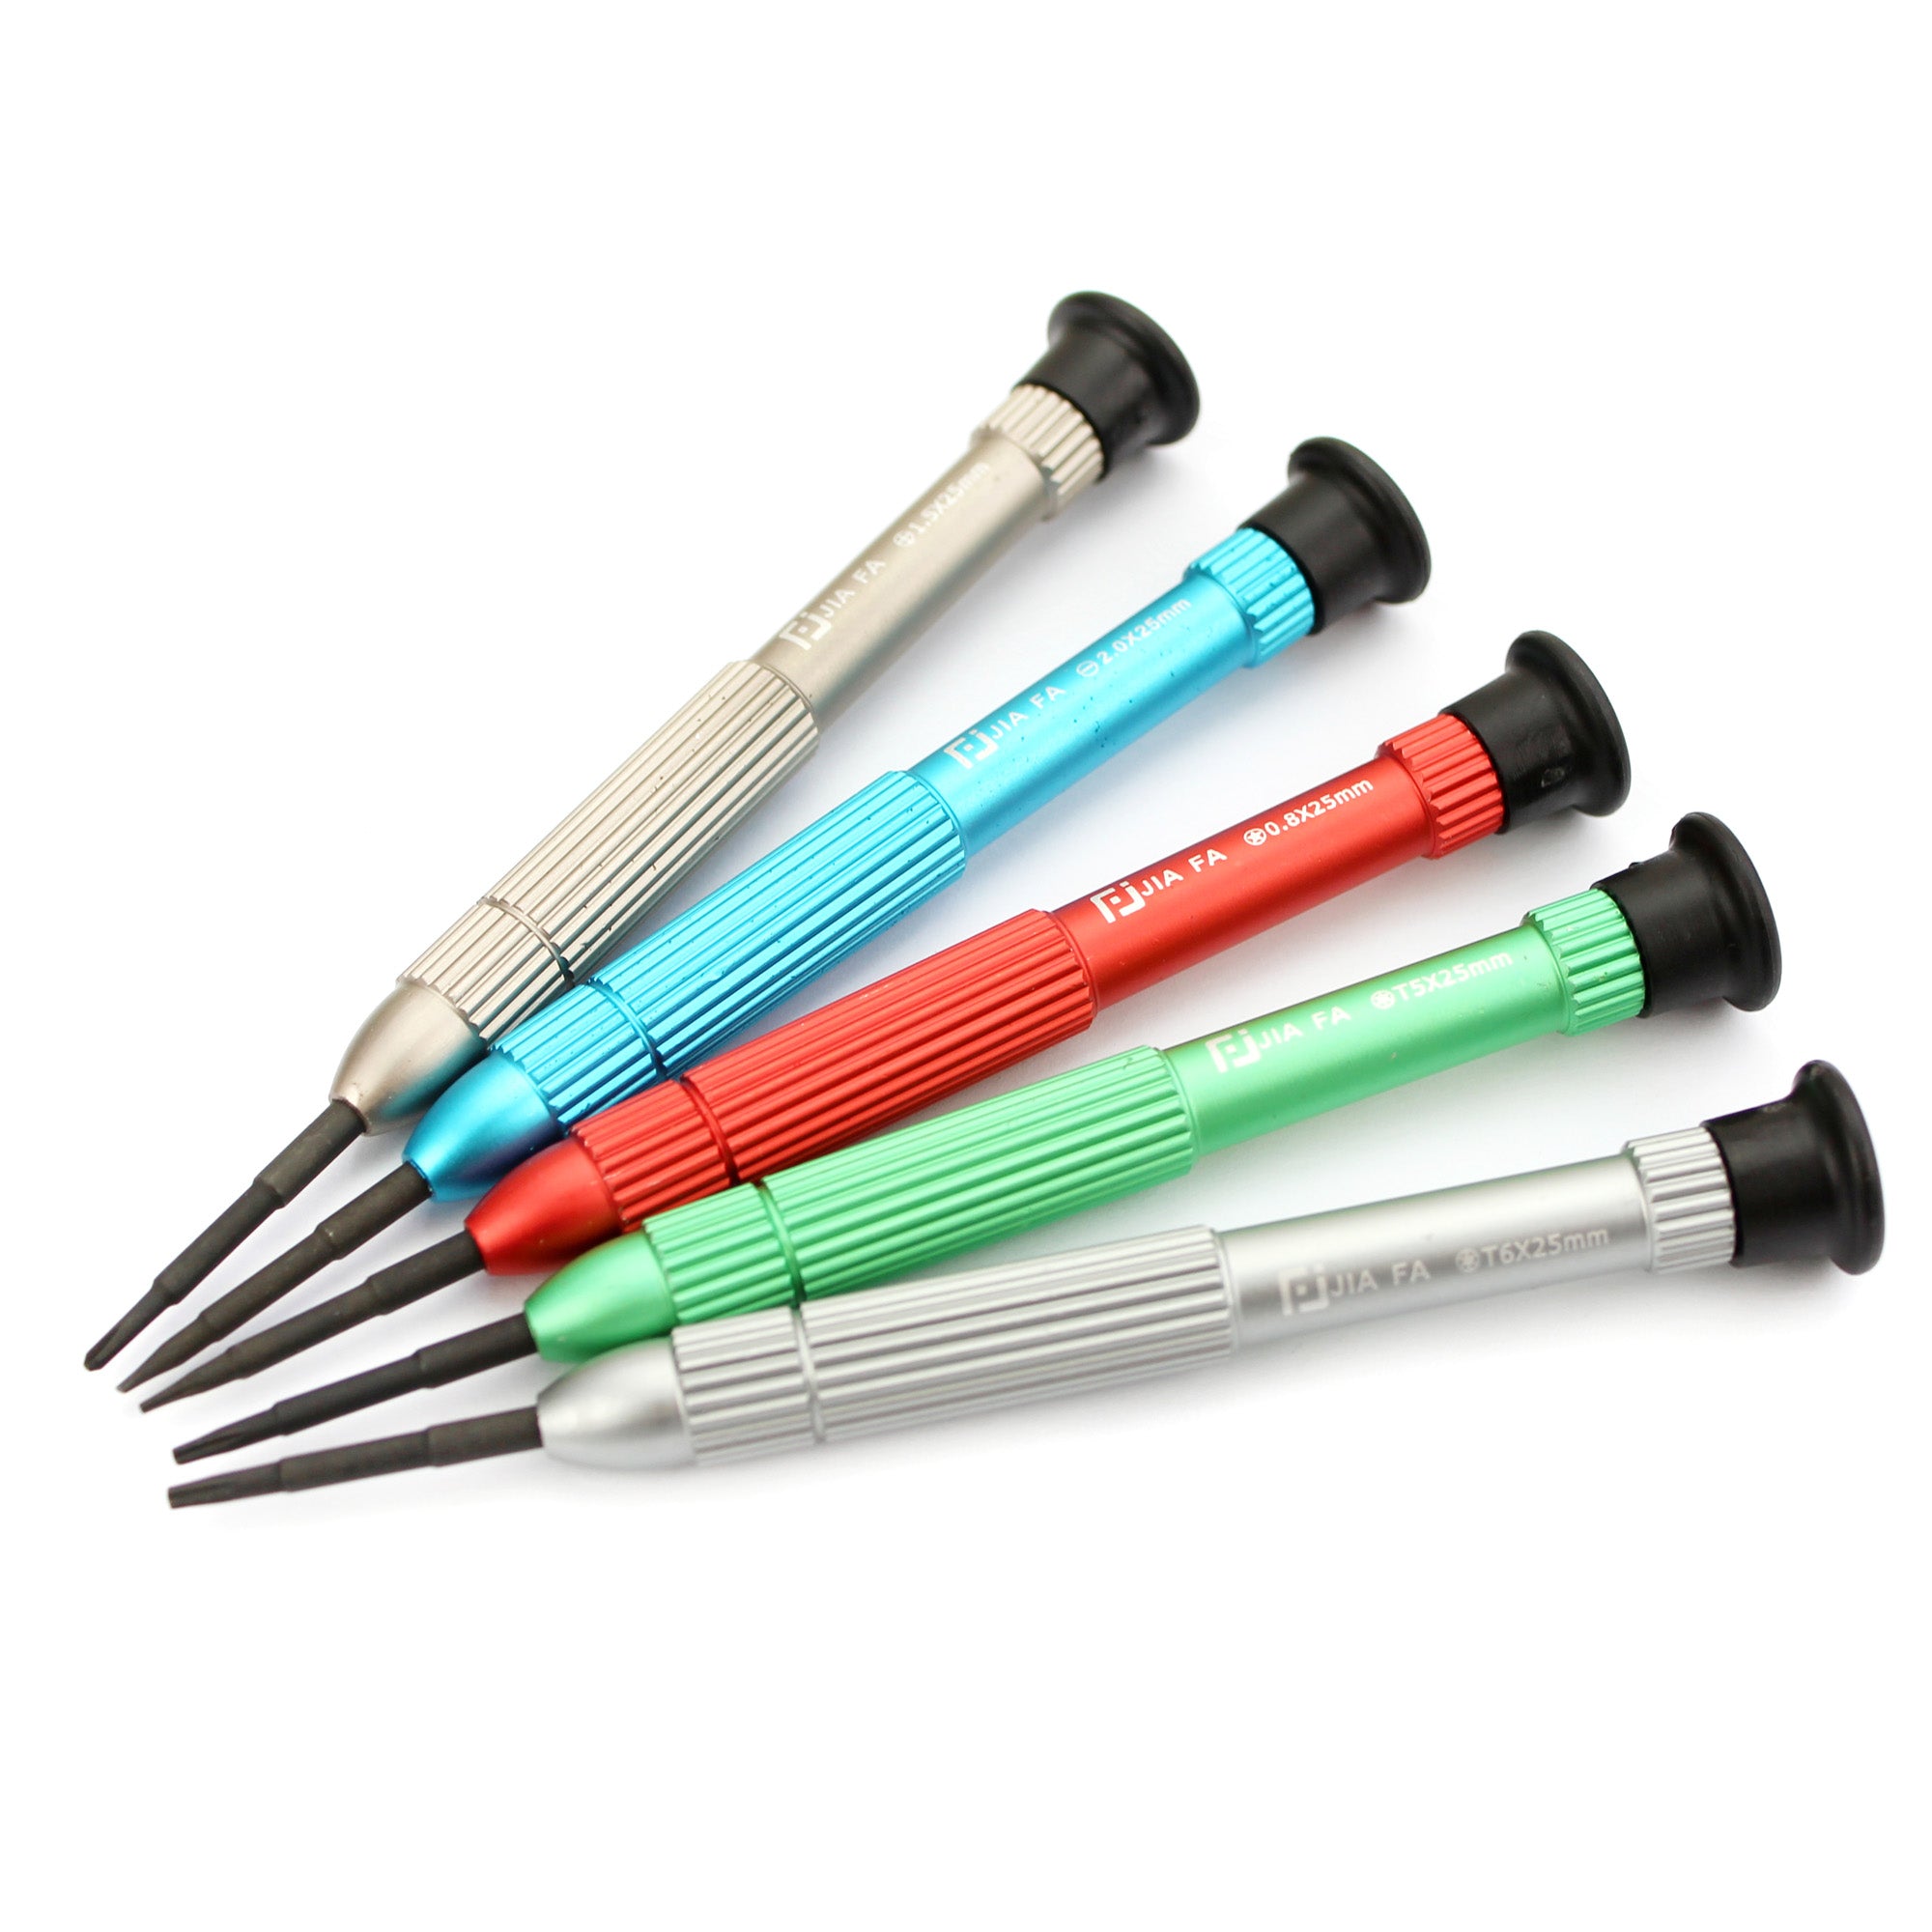 JF-823 5-in-1 Screwdriver Repair Tool Kit for iPhone Samsung Sony HTC Etc